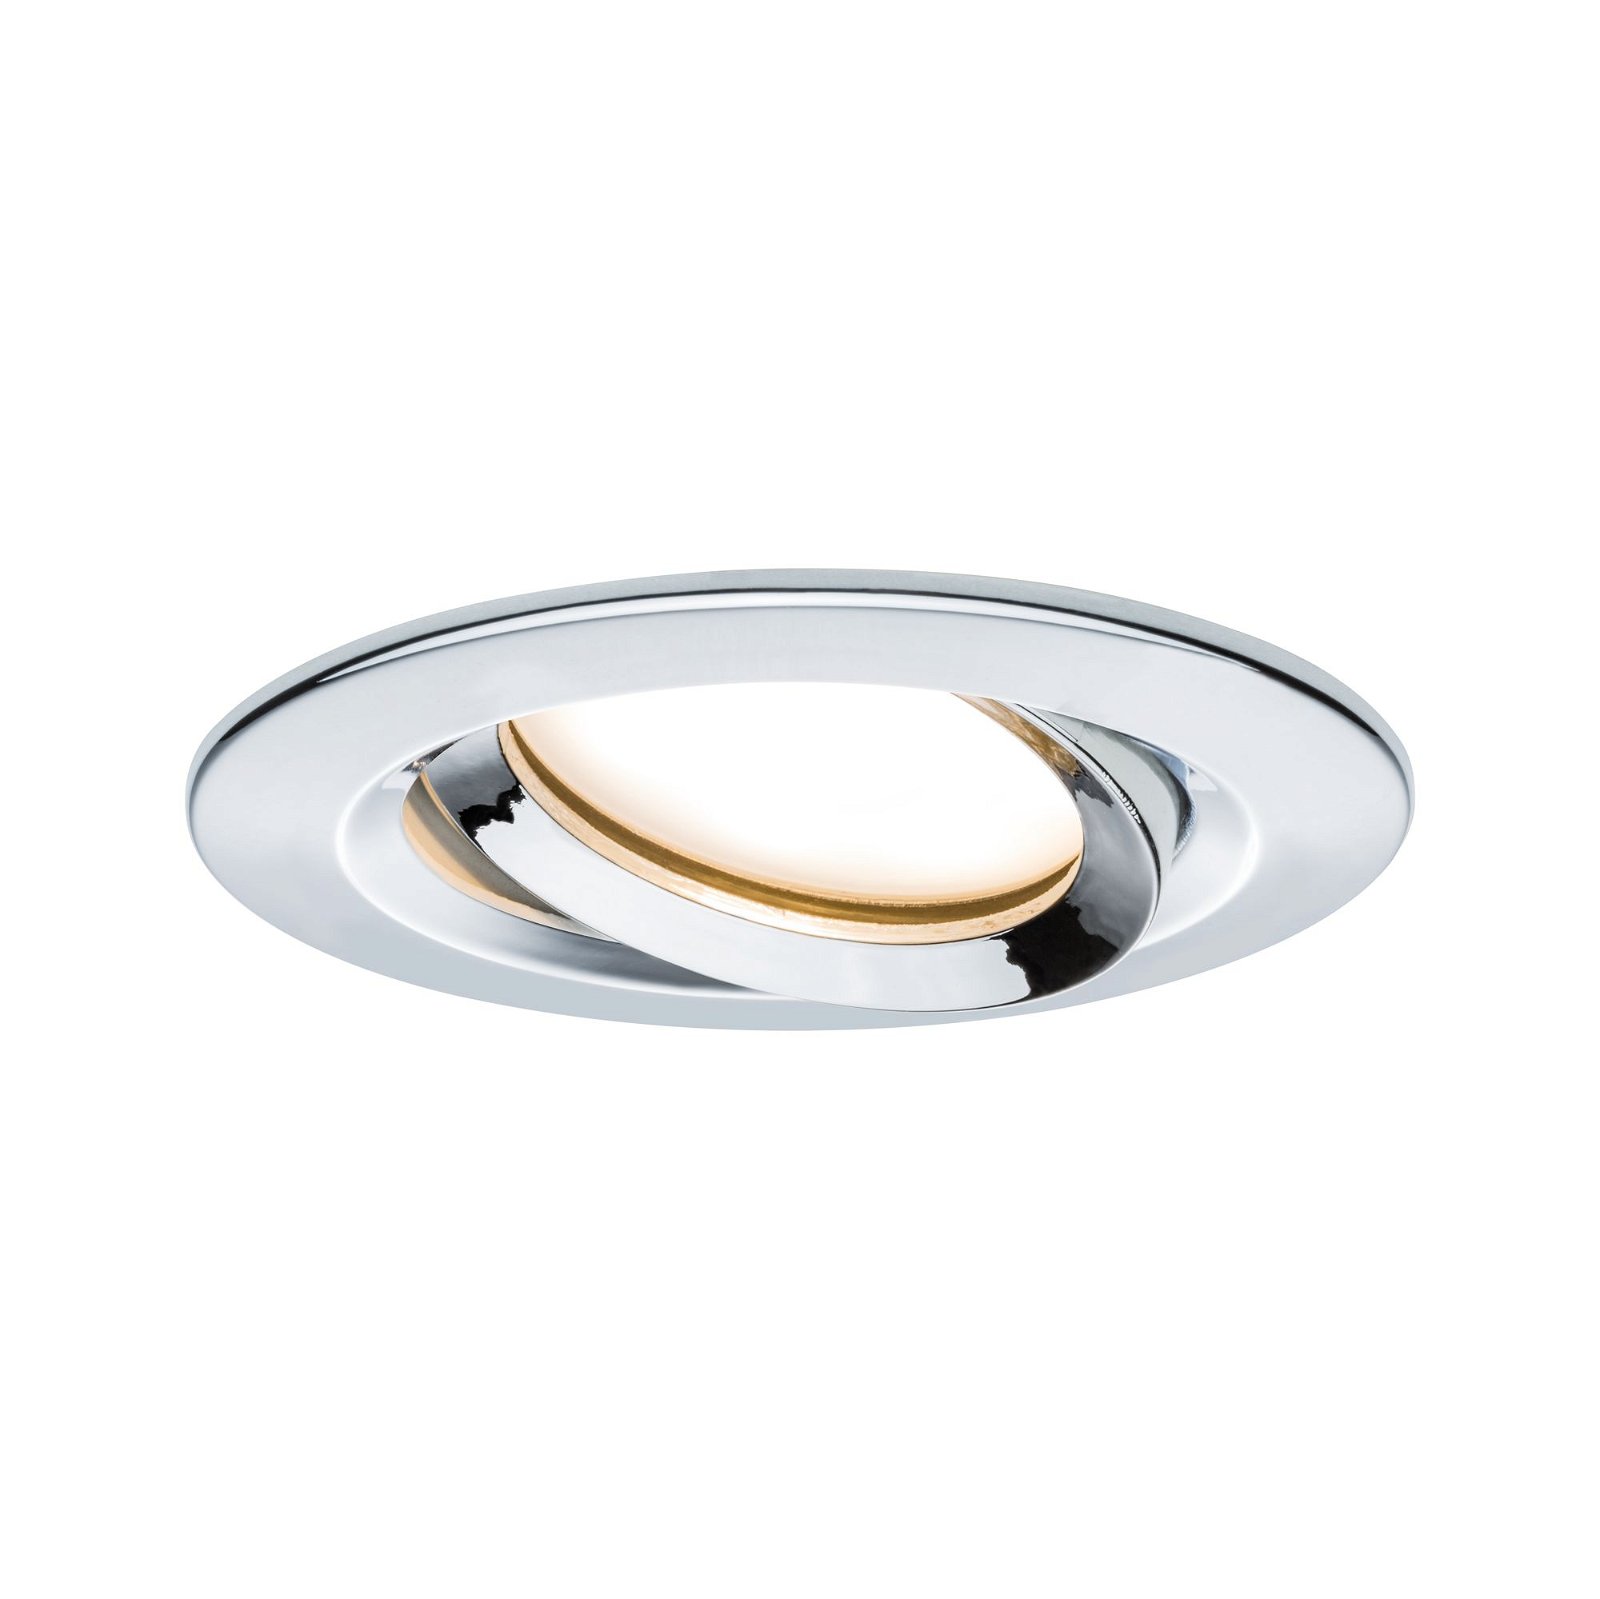 LED Recessed luminaire Nova Plus Coin Single luminaire Swivelling IP65 round 93mm 30° Coin 6W 470lm 230V dimmable 2700K Chrome